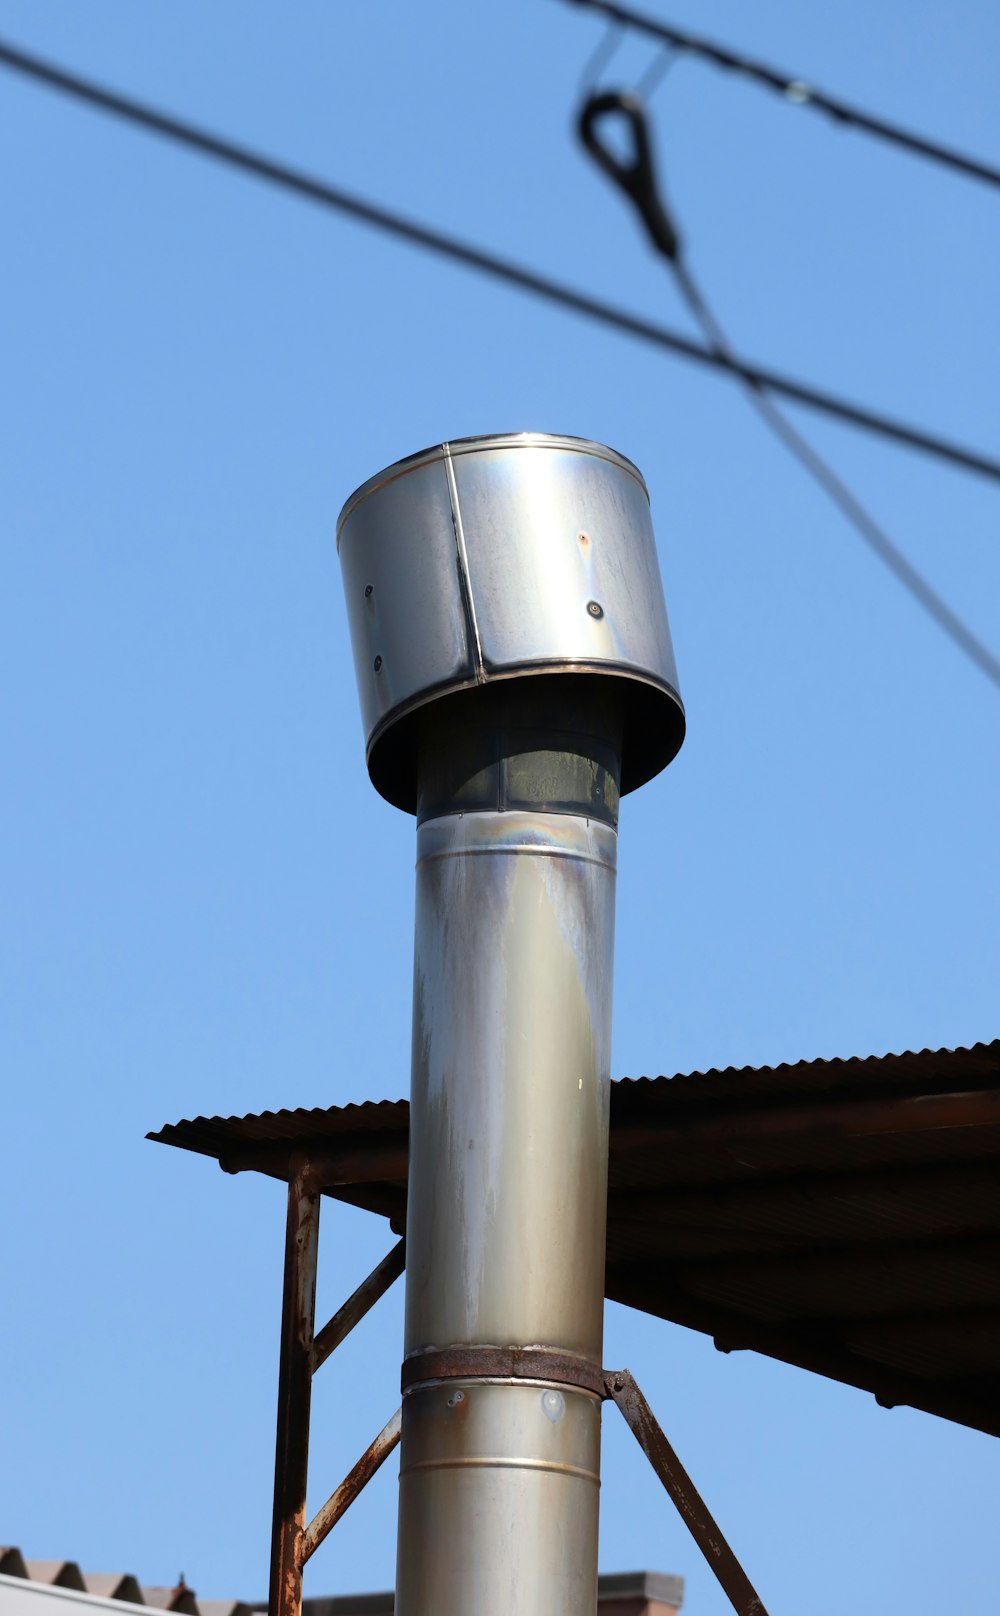 a metal object on top of a metal pole